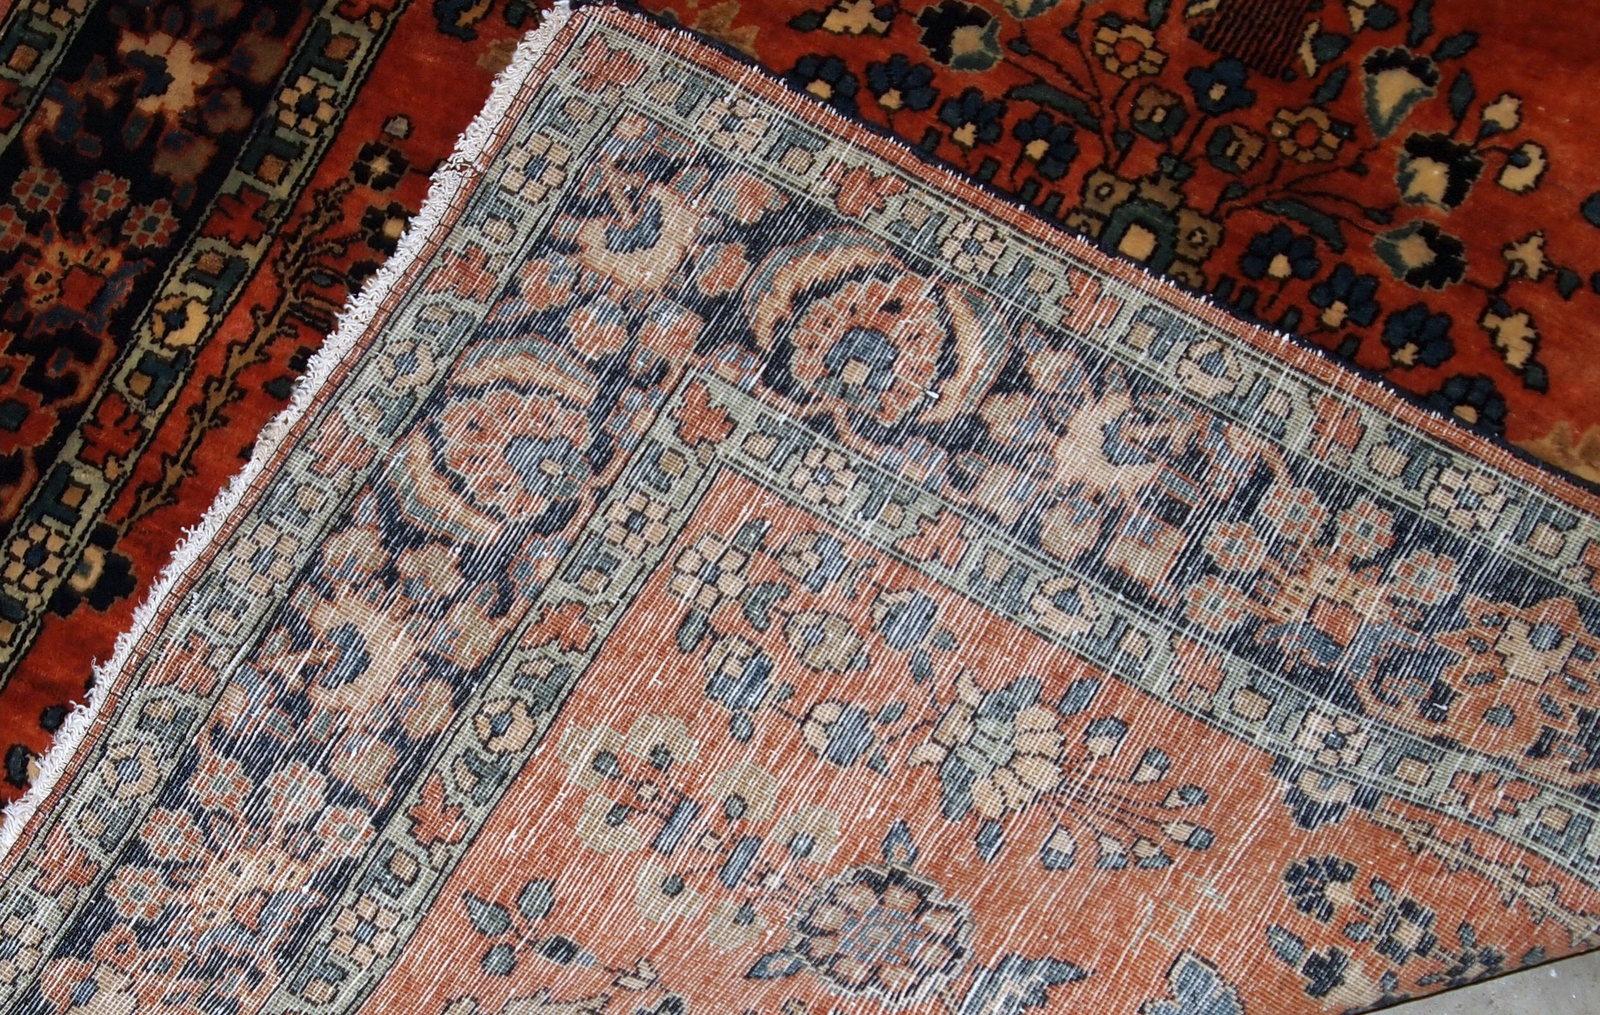 Handmade antique Sarouk style rug in original good condition. This rug is from the beginning of 20th century.

- Condition: original good, 

- circa 1900s,

- Size: 3.5' x 5.5' (106cm x 167cm),

- Material: Wool,

- Country of origin: